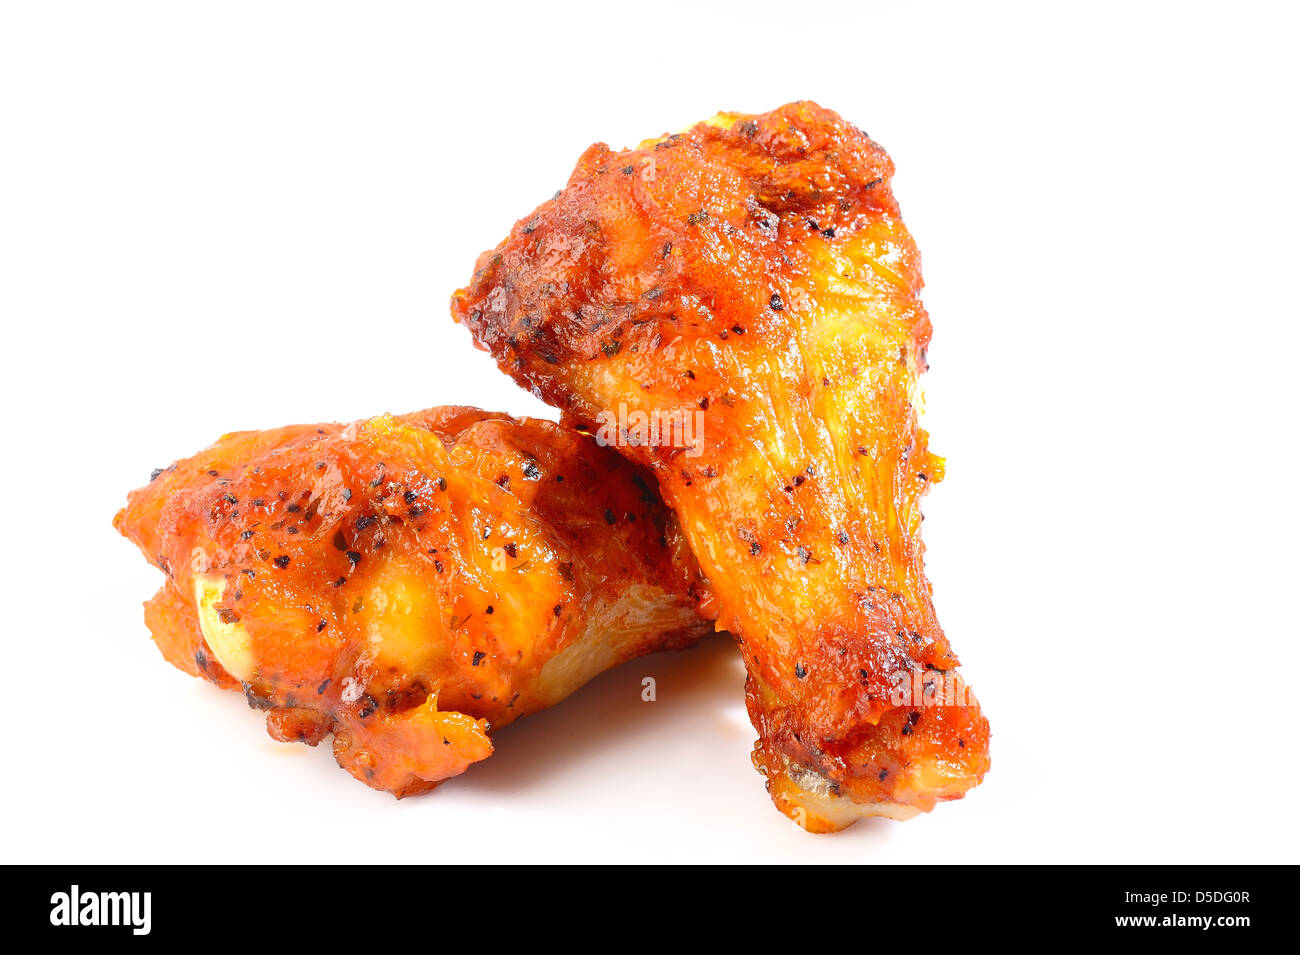 chicken wings stick on white background Stock Photo